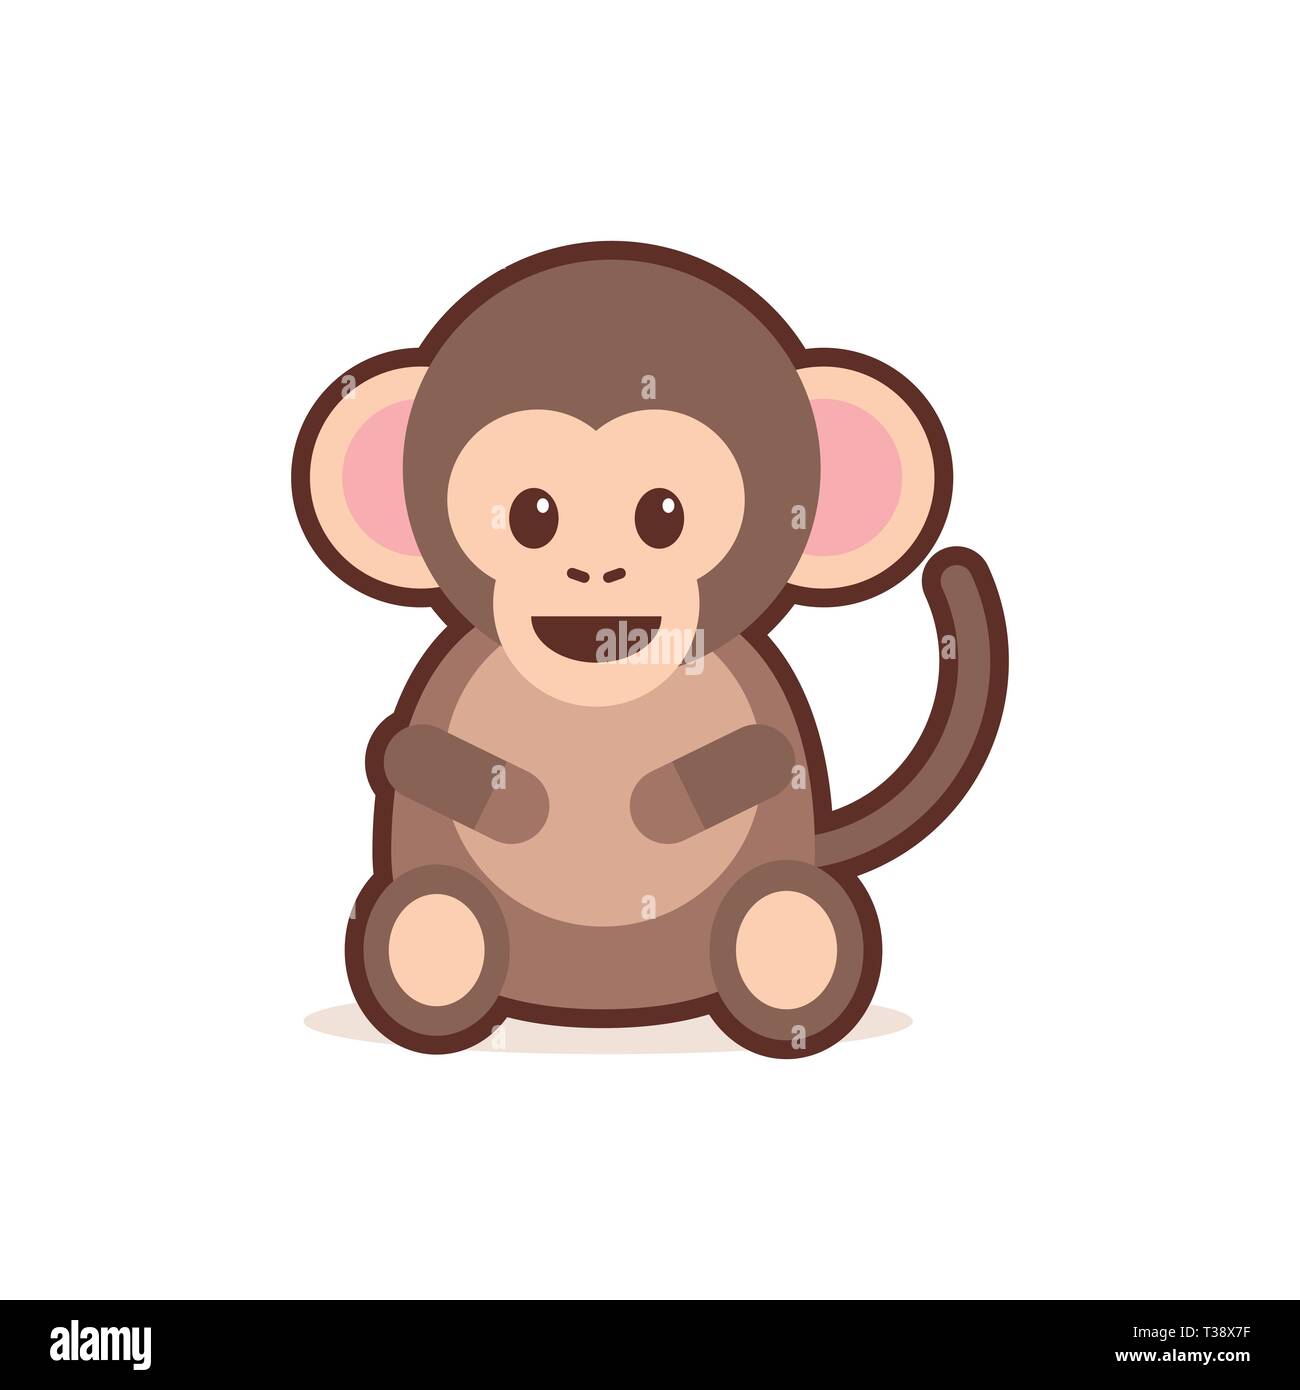 cute little monkey cartoon comic character with smiling face happy emoji anime kawaii style funny animals for kids concept vector illustration Stock Vector